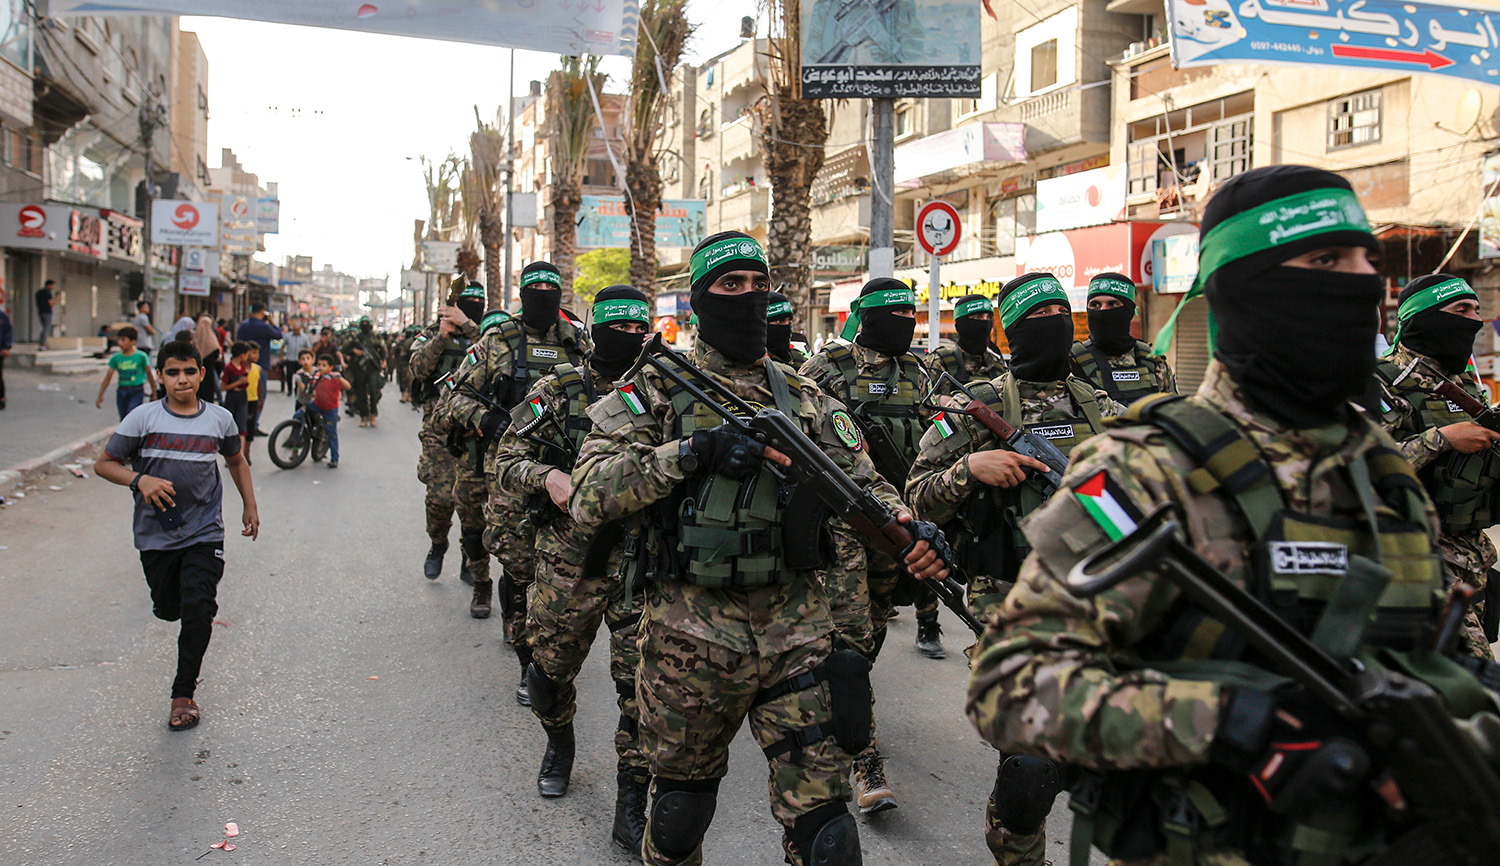 
Terrorists from the Al-Qassam Brigades, a military wing of Hamas, marching in Gaza on May 28, 2021. Sameh Rahmi/NurPhoto via Getty Images.






